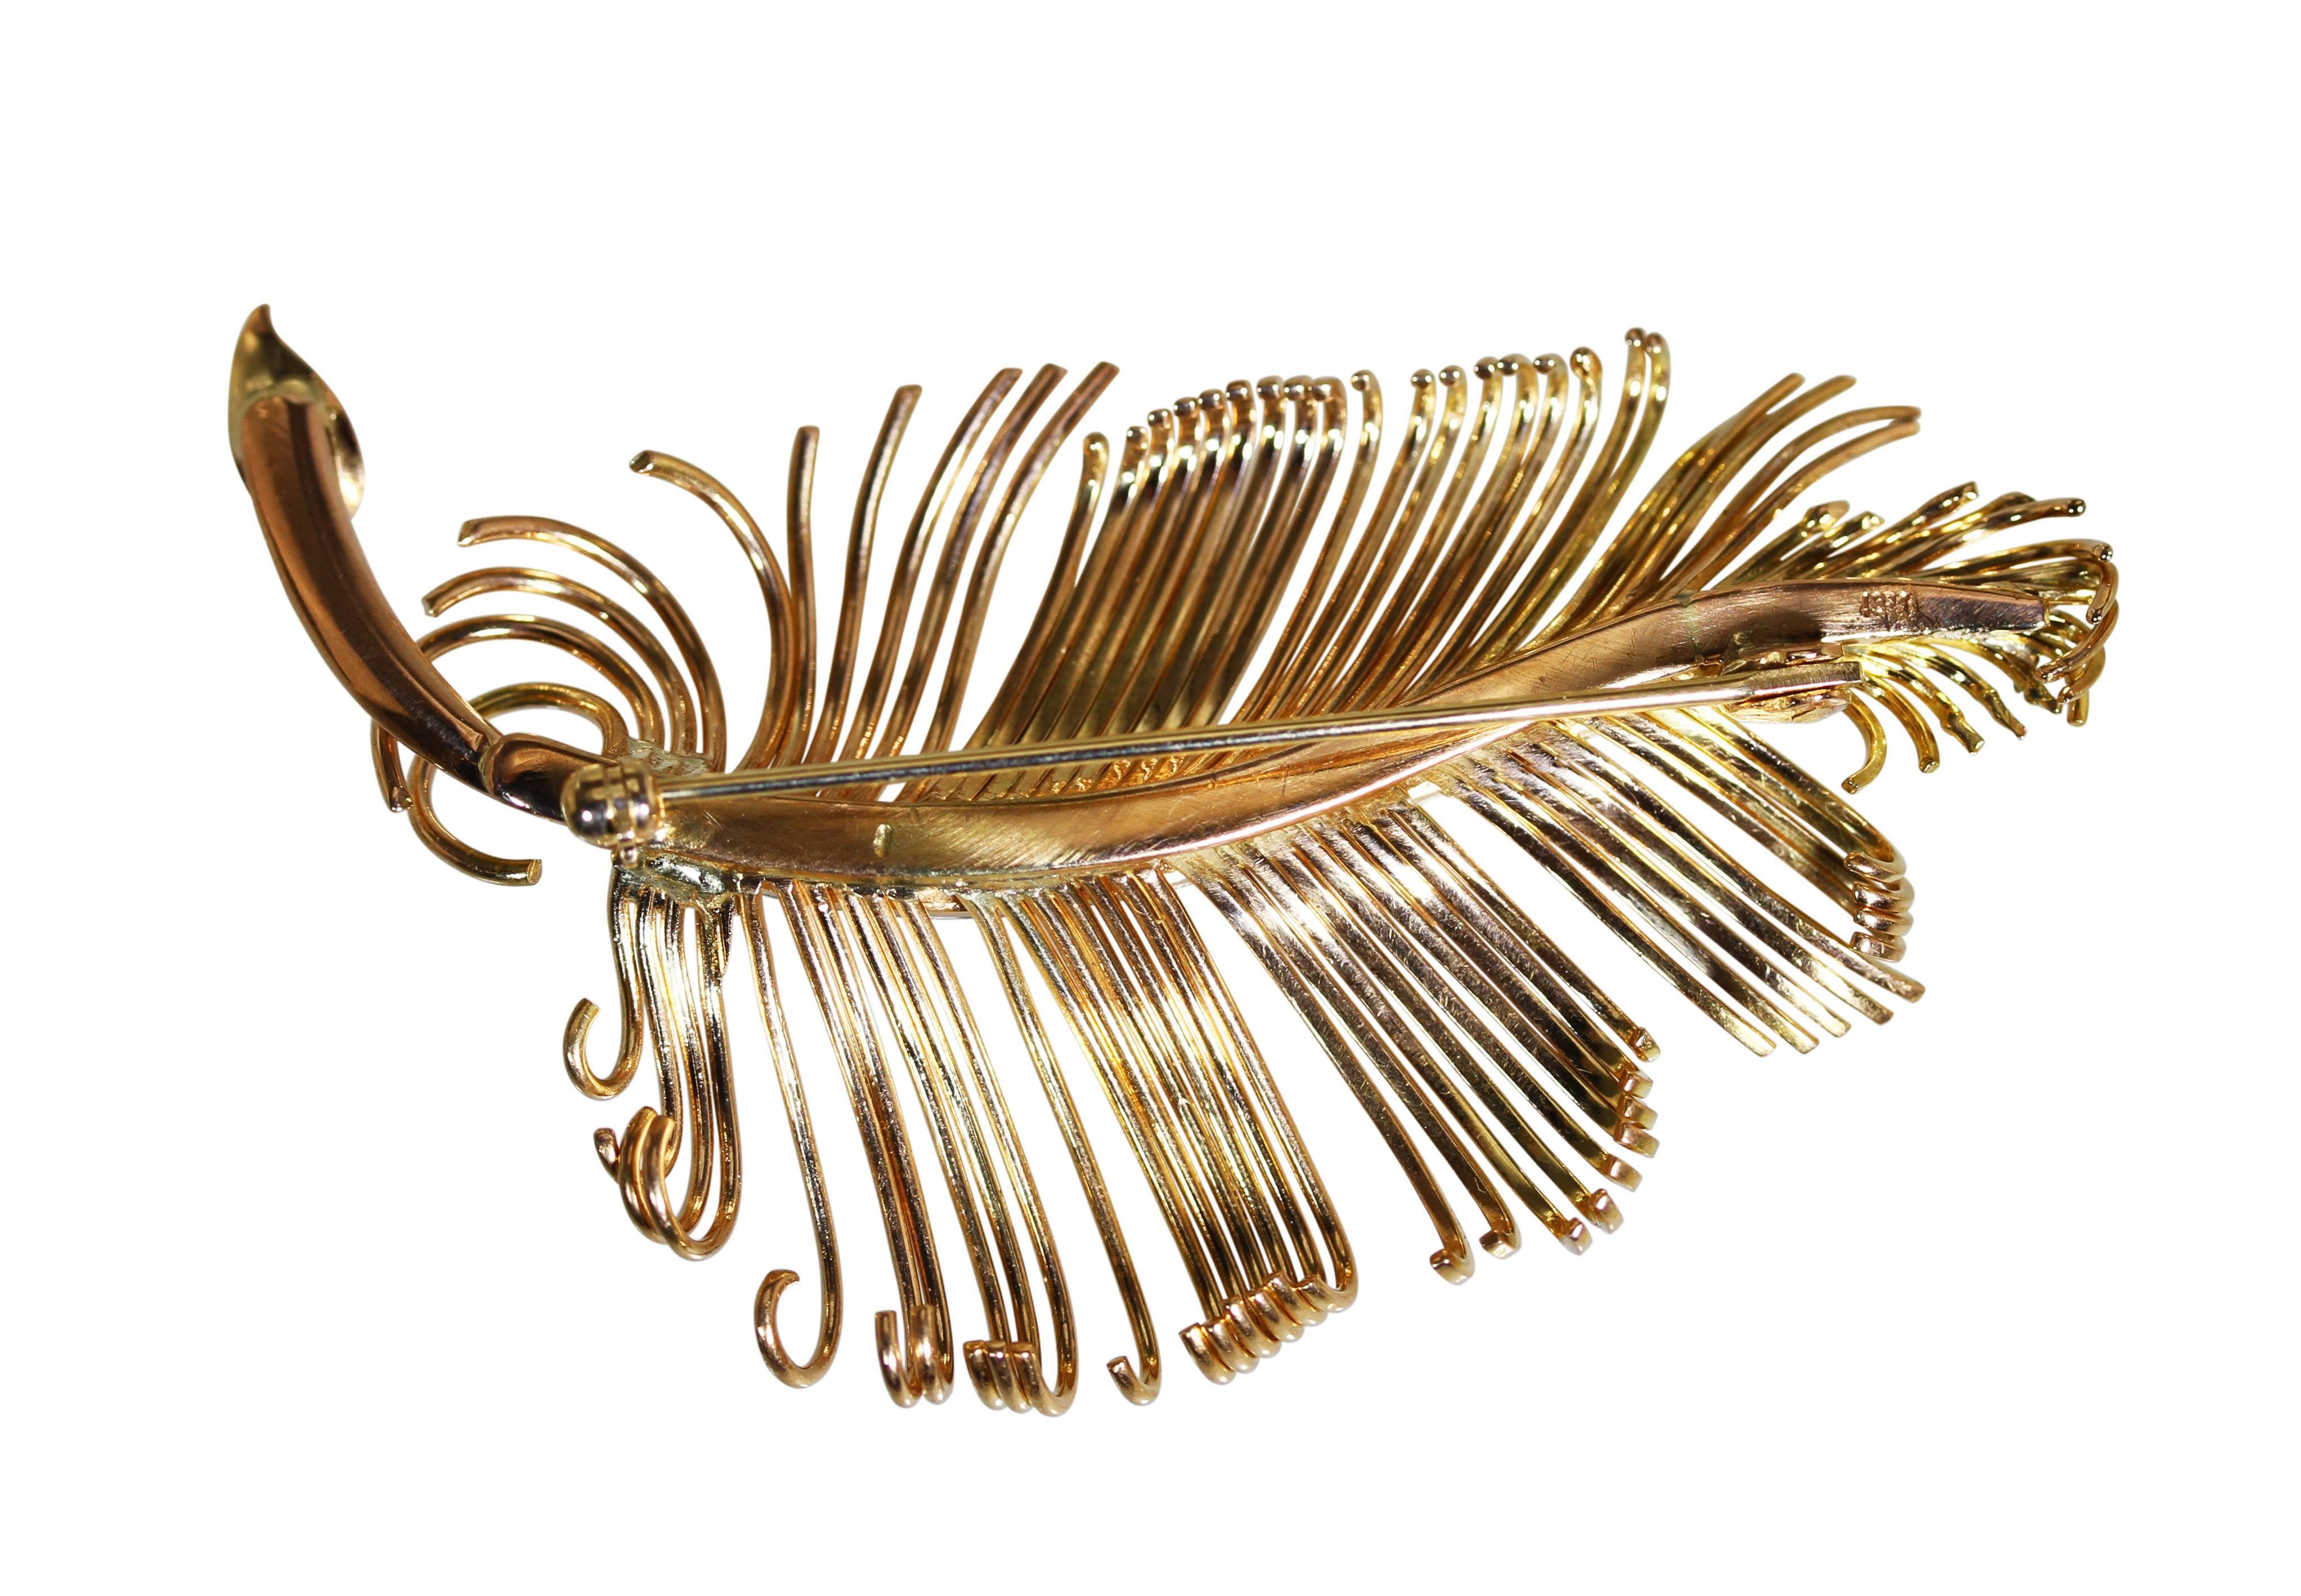 18 Karat Rose Gold and Diamond Feather Brooch
• Stamped 18k
• 10 single-cut diamonds approximately 0.20 carat
• Measuring 2 1/2 by 1 1/2 inch, gross weight 18.1 grams